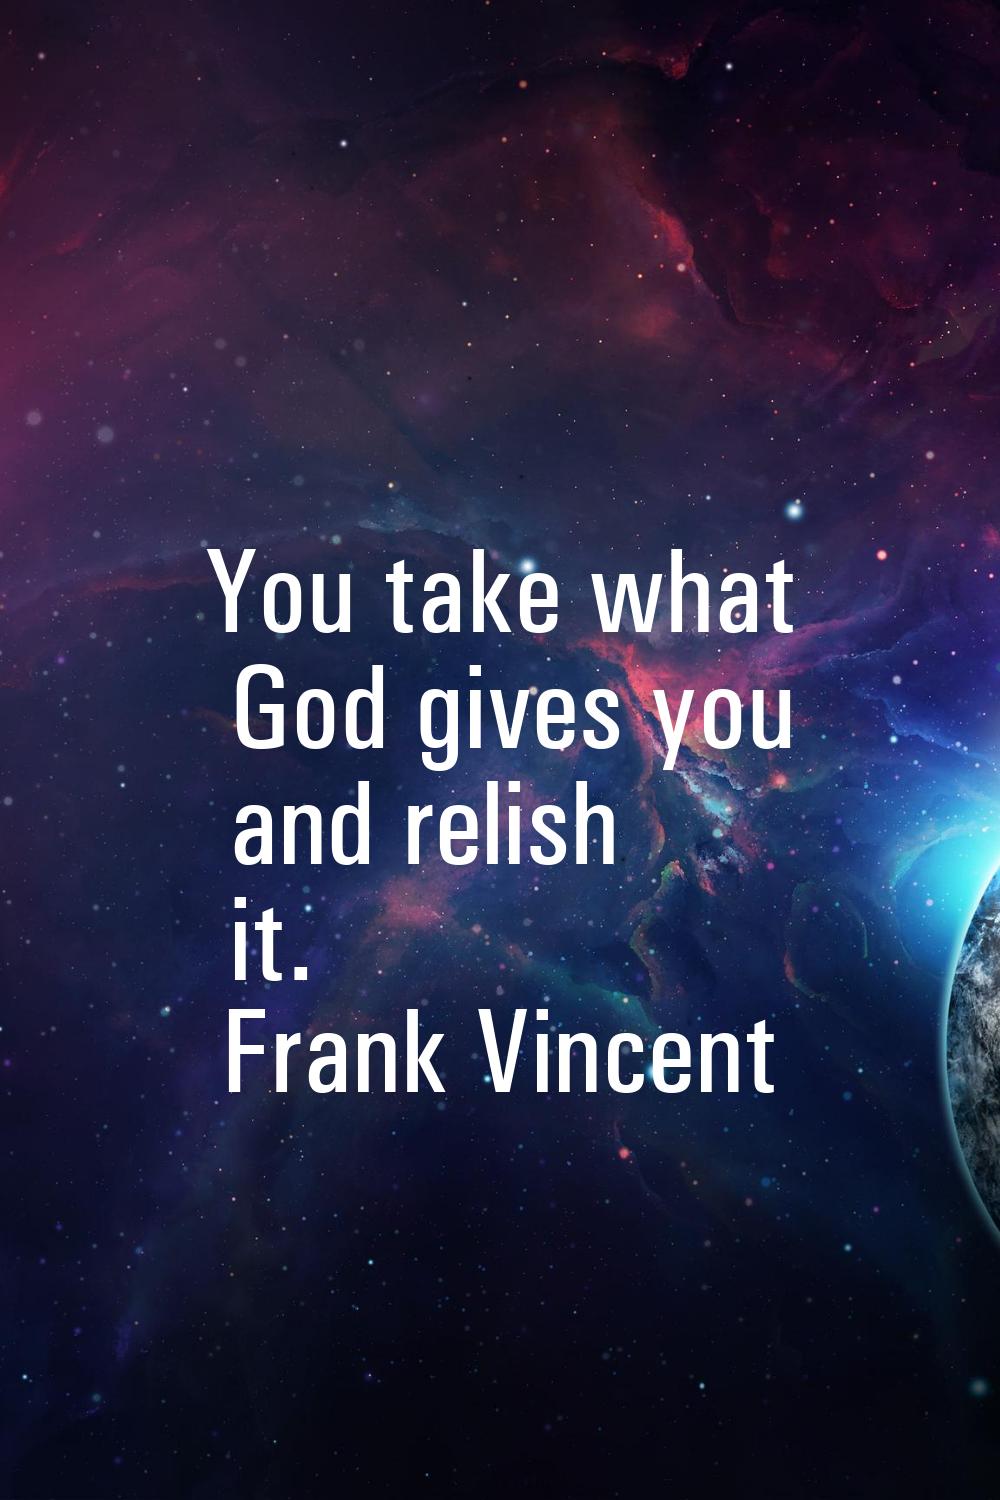 You take what God gives you and relish it.